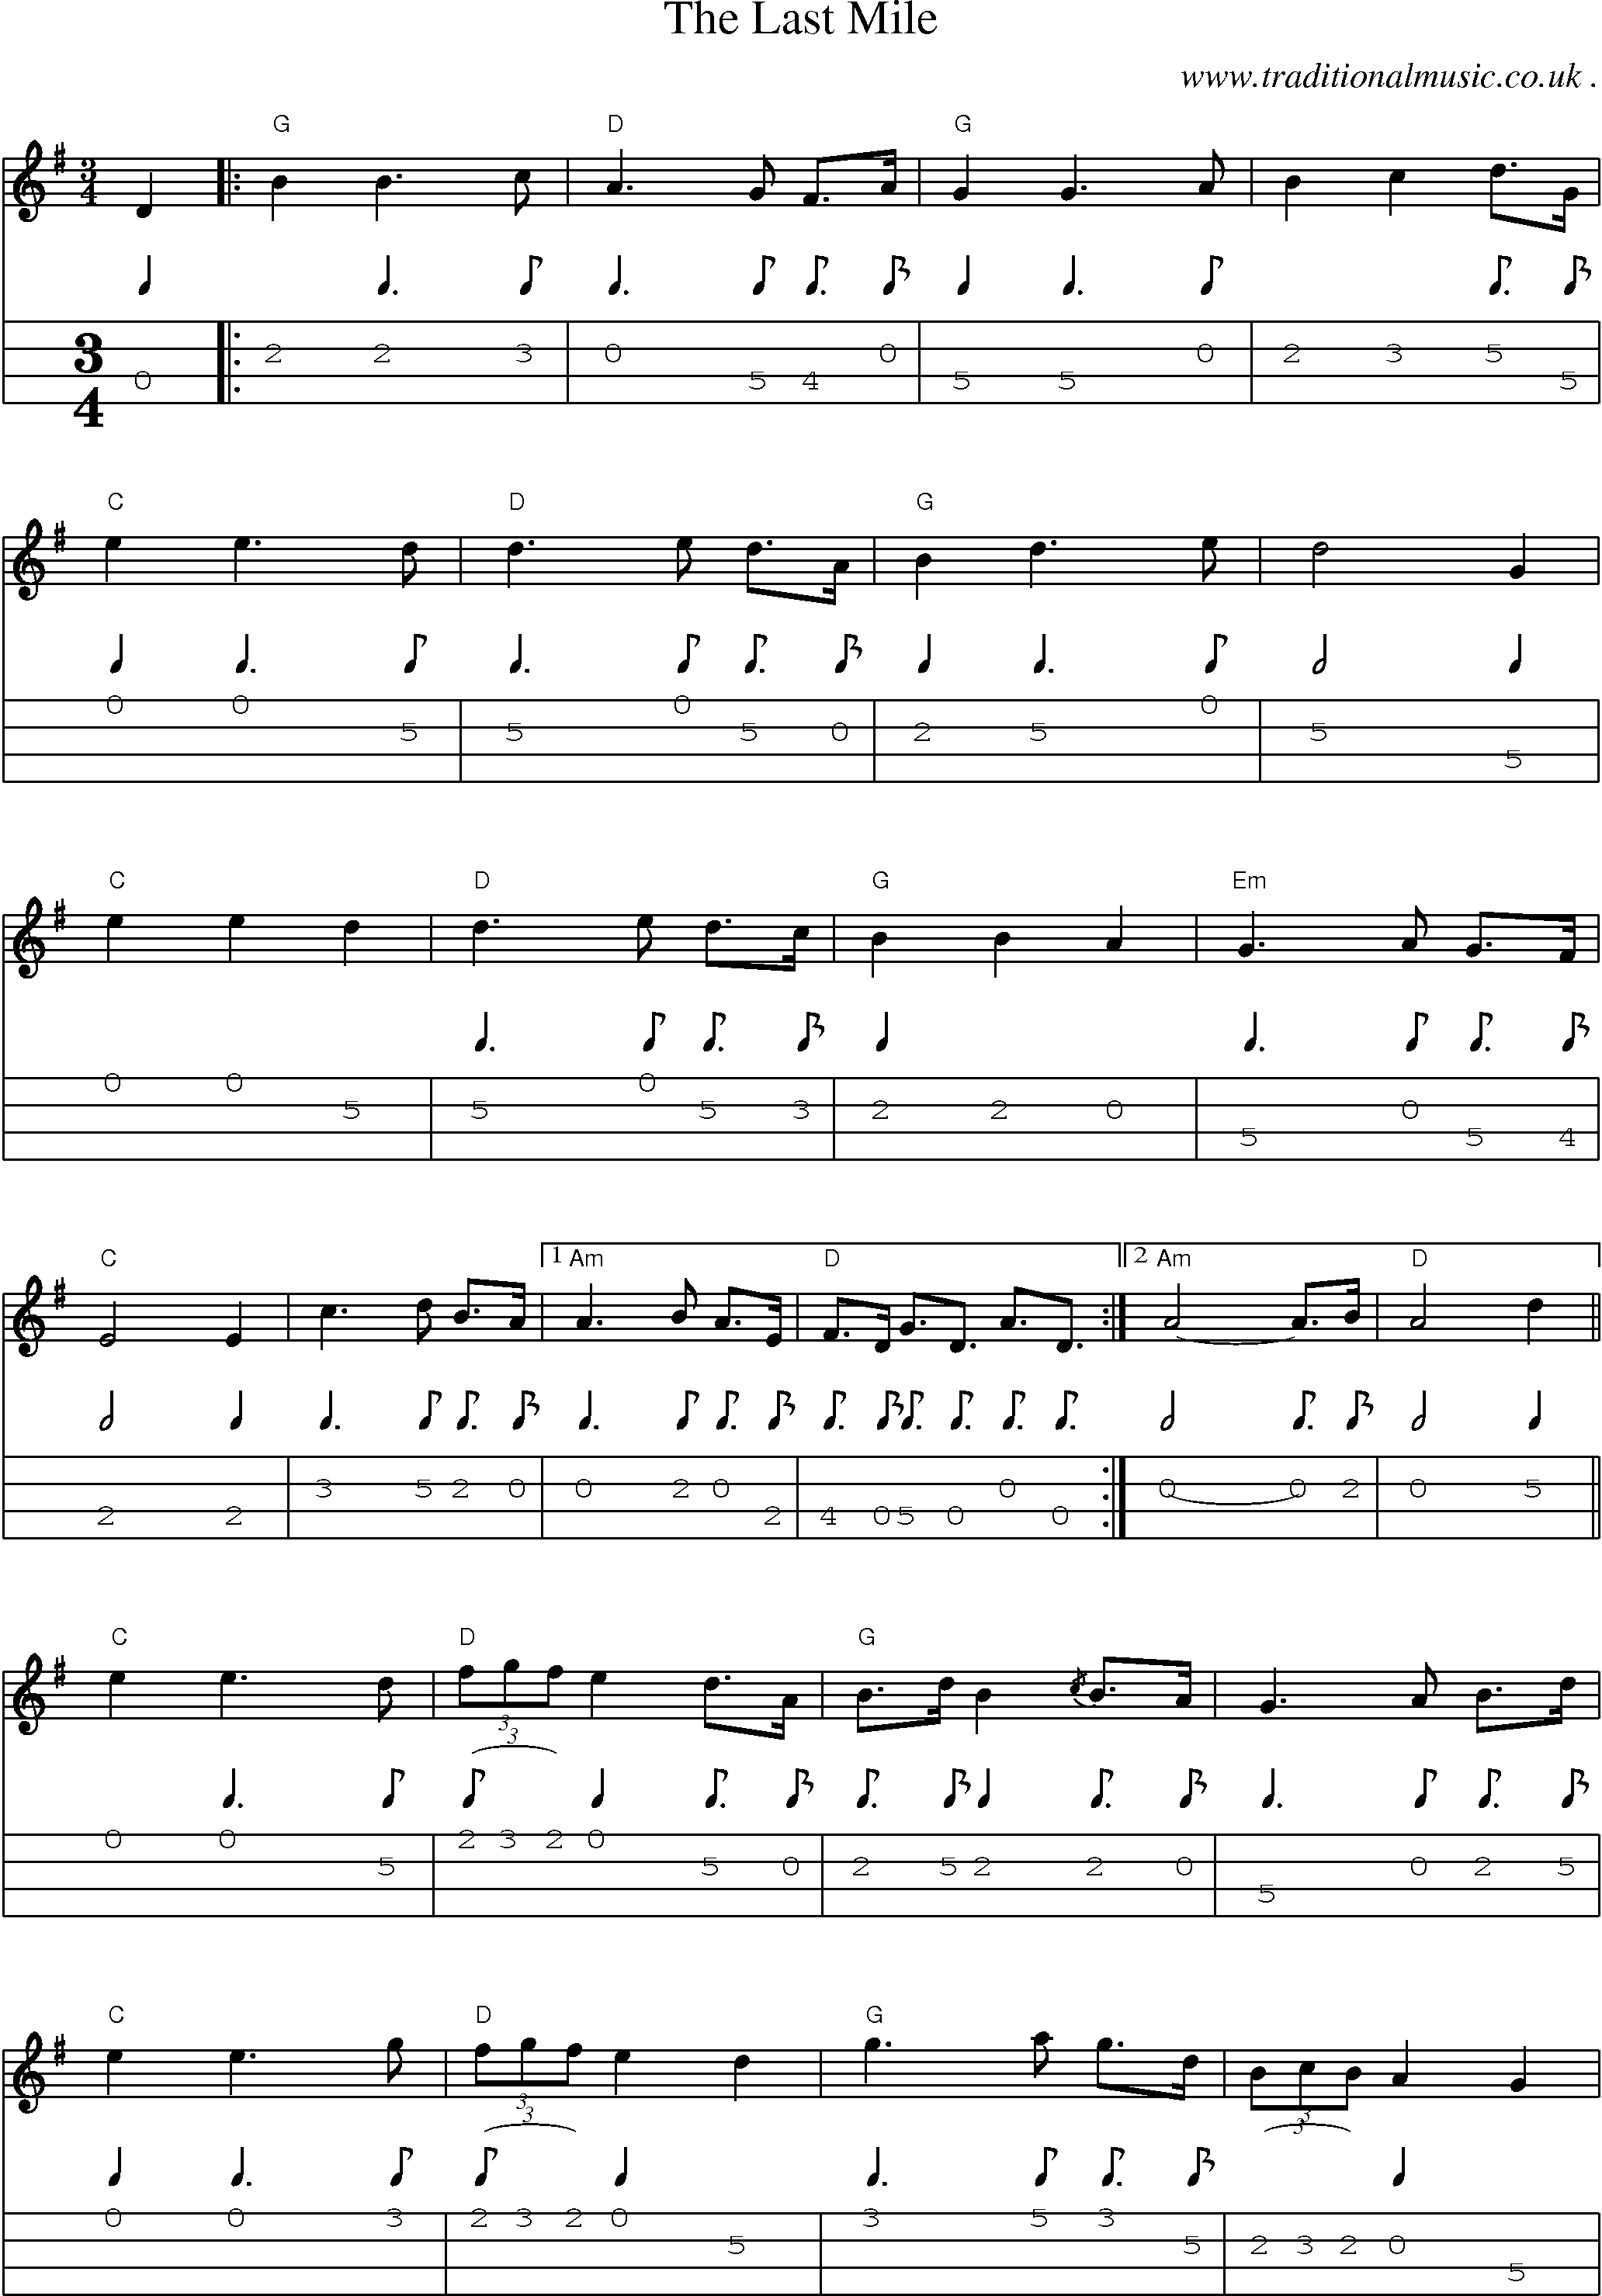 Music Score and Guitar Tabs for The Last Mile